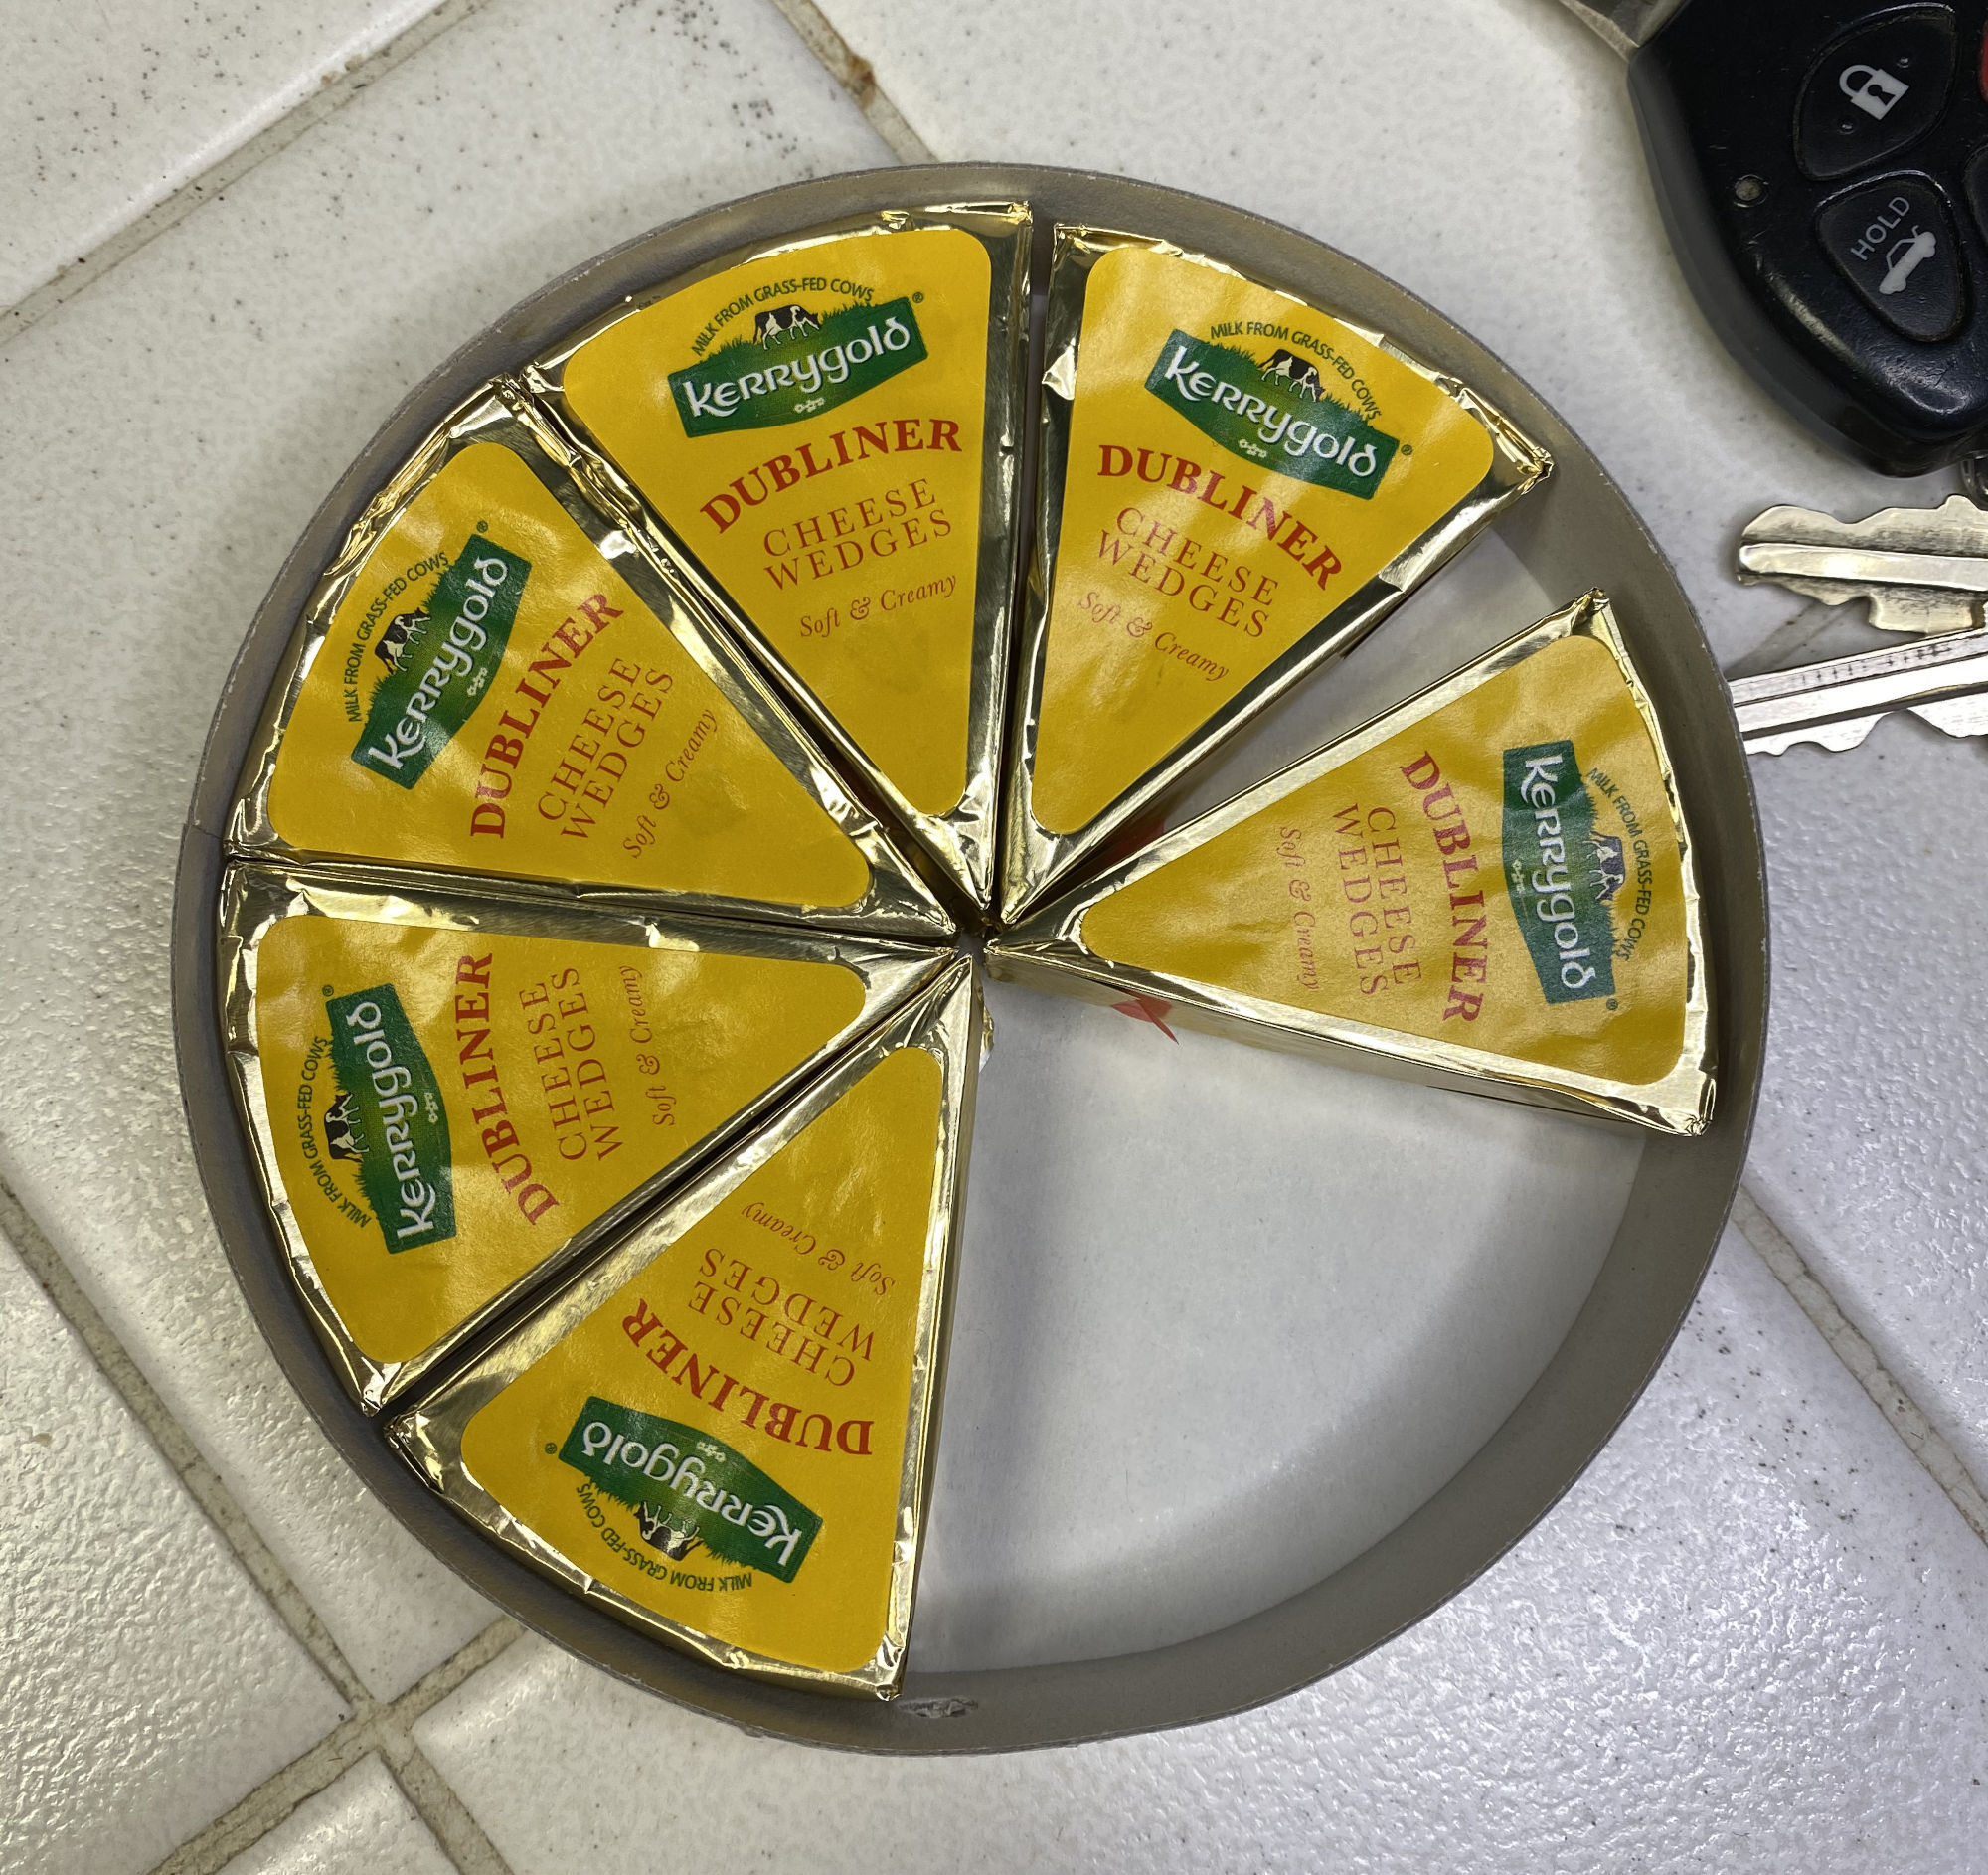 Kerrygold Dubliner Cheese Wedges